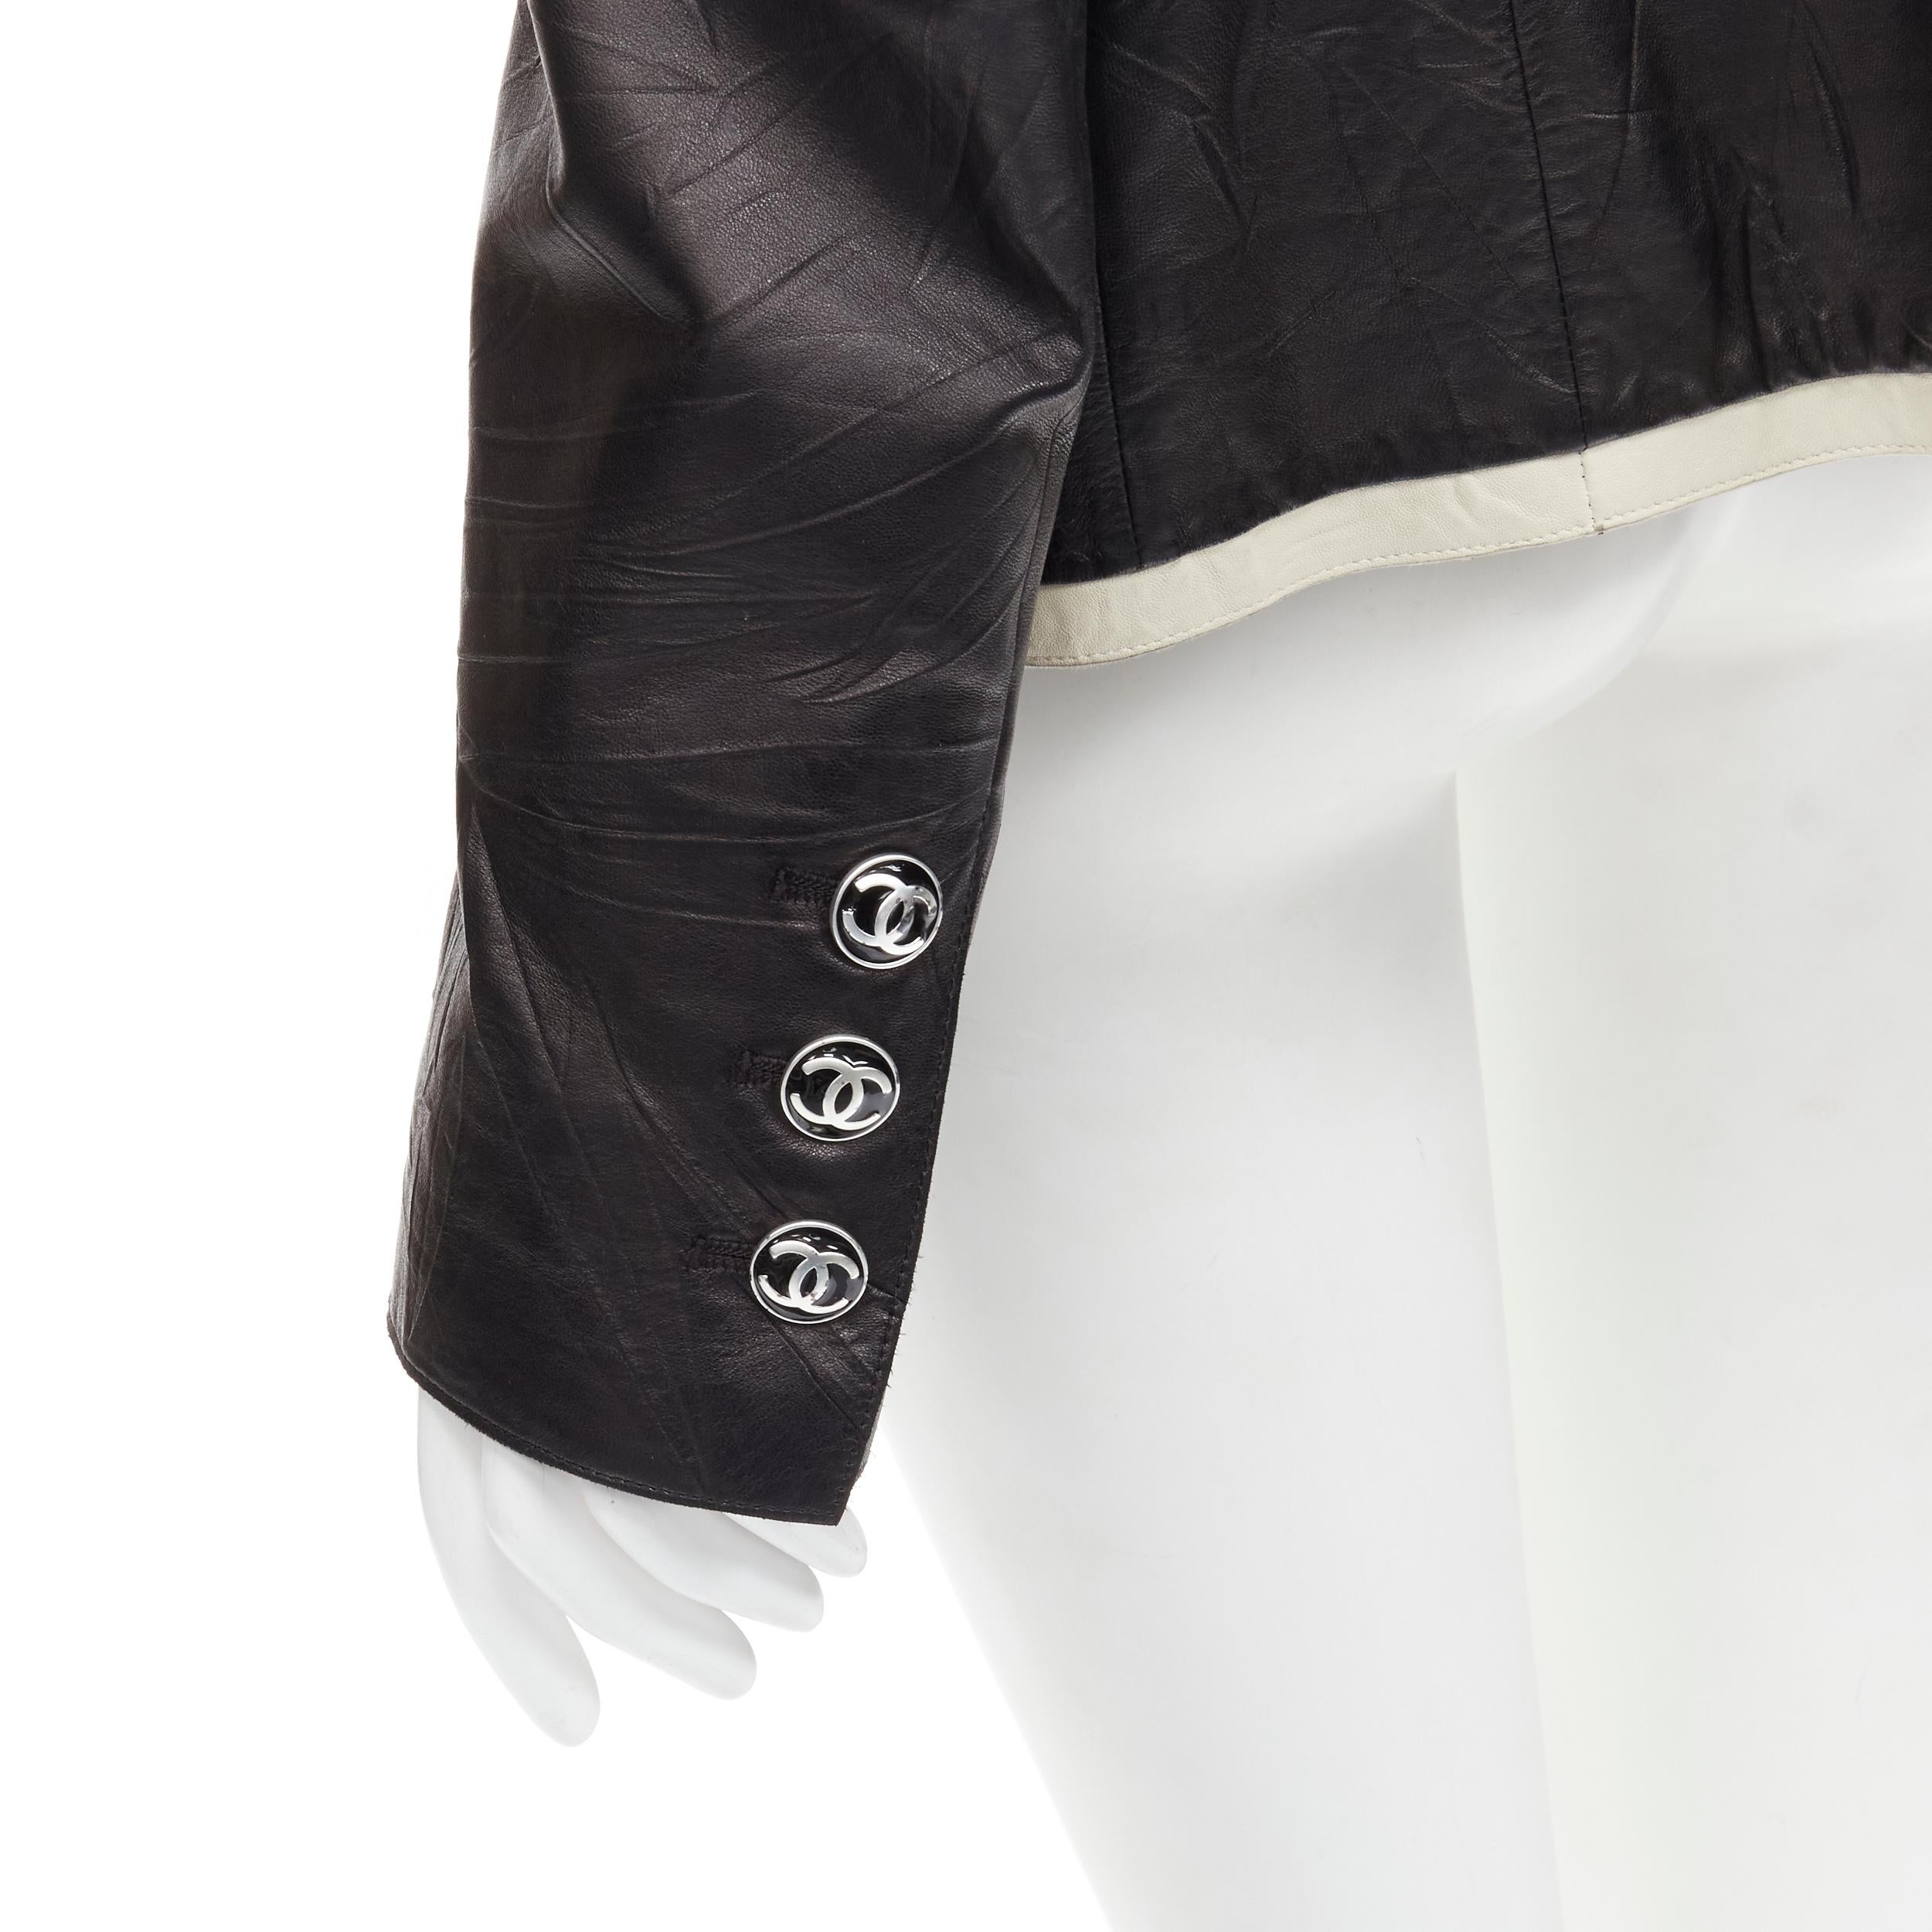 CHANEL 05P black crinkled creased lambskin leather 4-pocket jacket FR40 M
Brand: Chanel
Designer: Karl Lagerfeld
Collection: 05P 
Material: Leather
Color: Black
Pattern: Solid
Extra Detail: Pressed crinkled lambskin leather. Cream trim along collar.